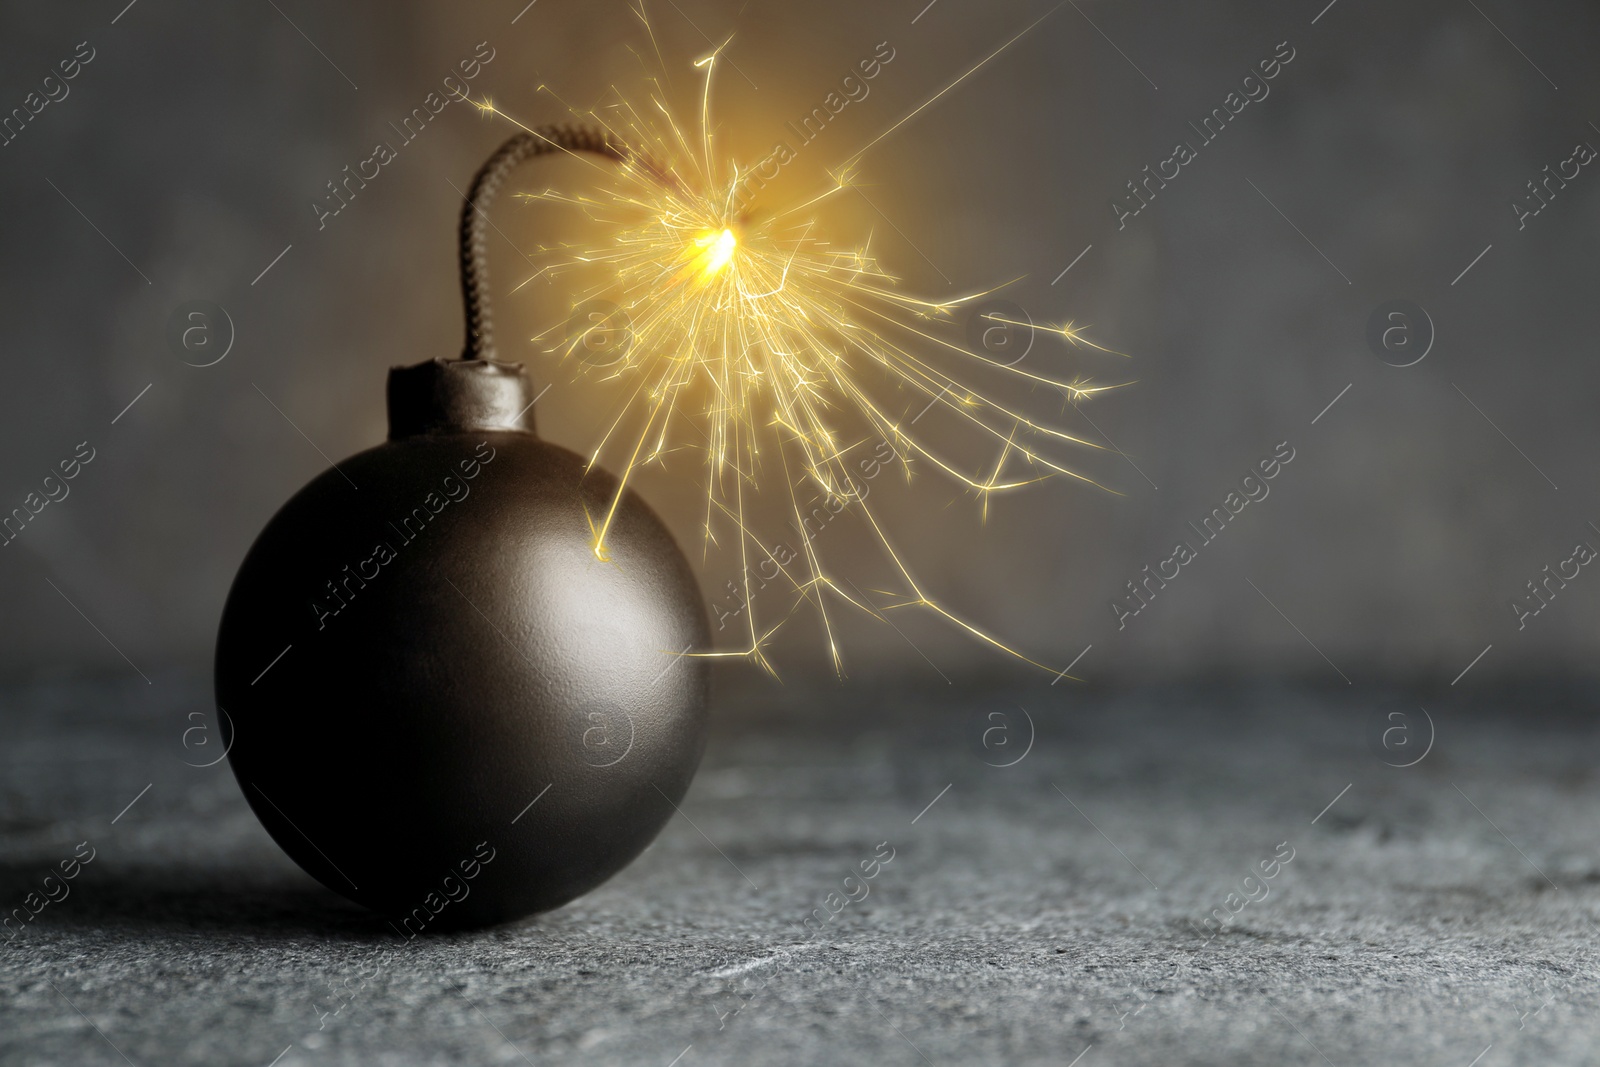 Image of Old fashioned black bomb with lit fuse on grey table, space for text